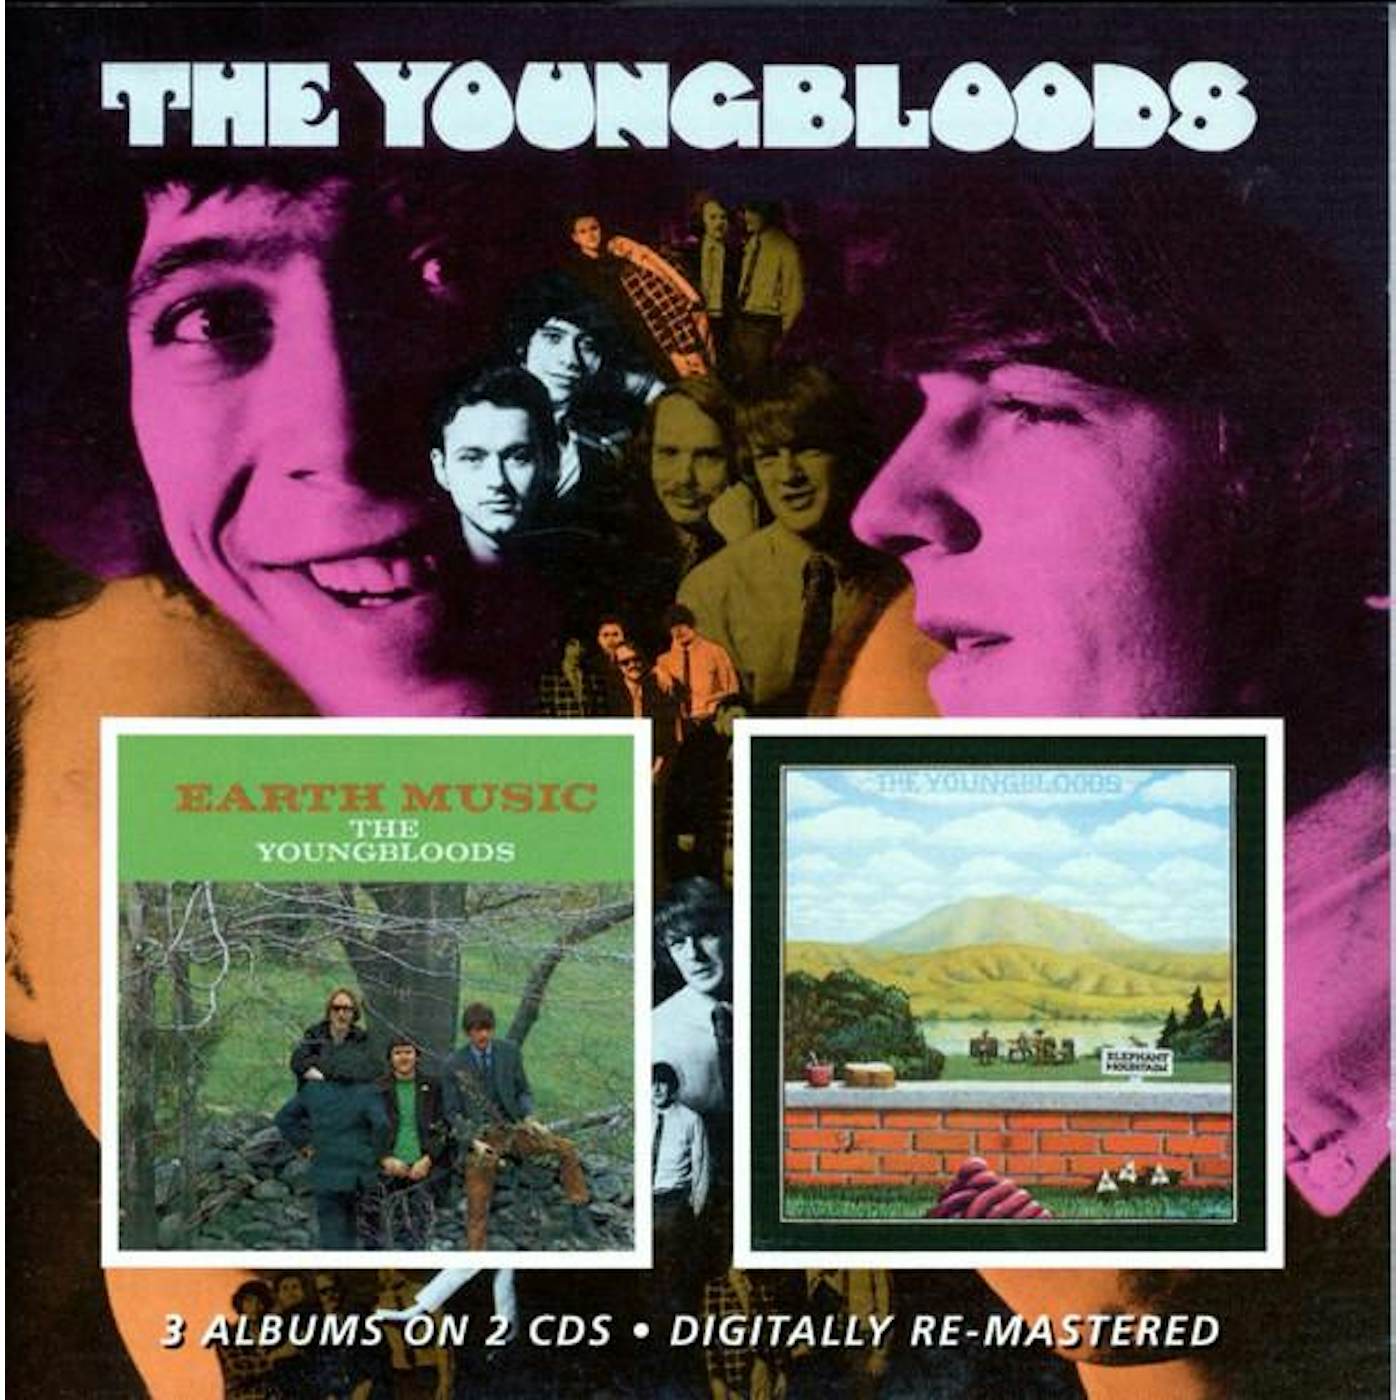 The Youngbloods / EARTH MUSIC / ELEPHANT MOUNTAIN (REMASTERED) CD